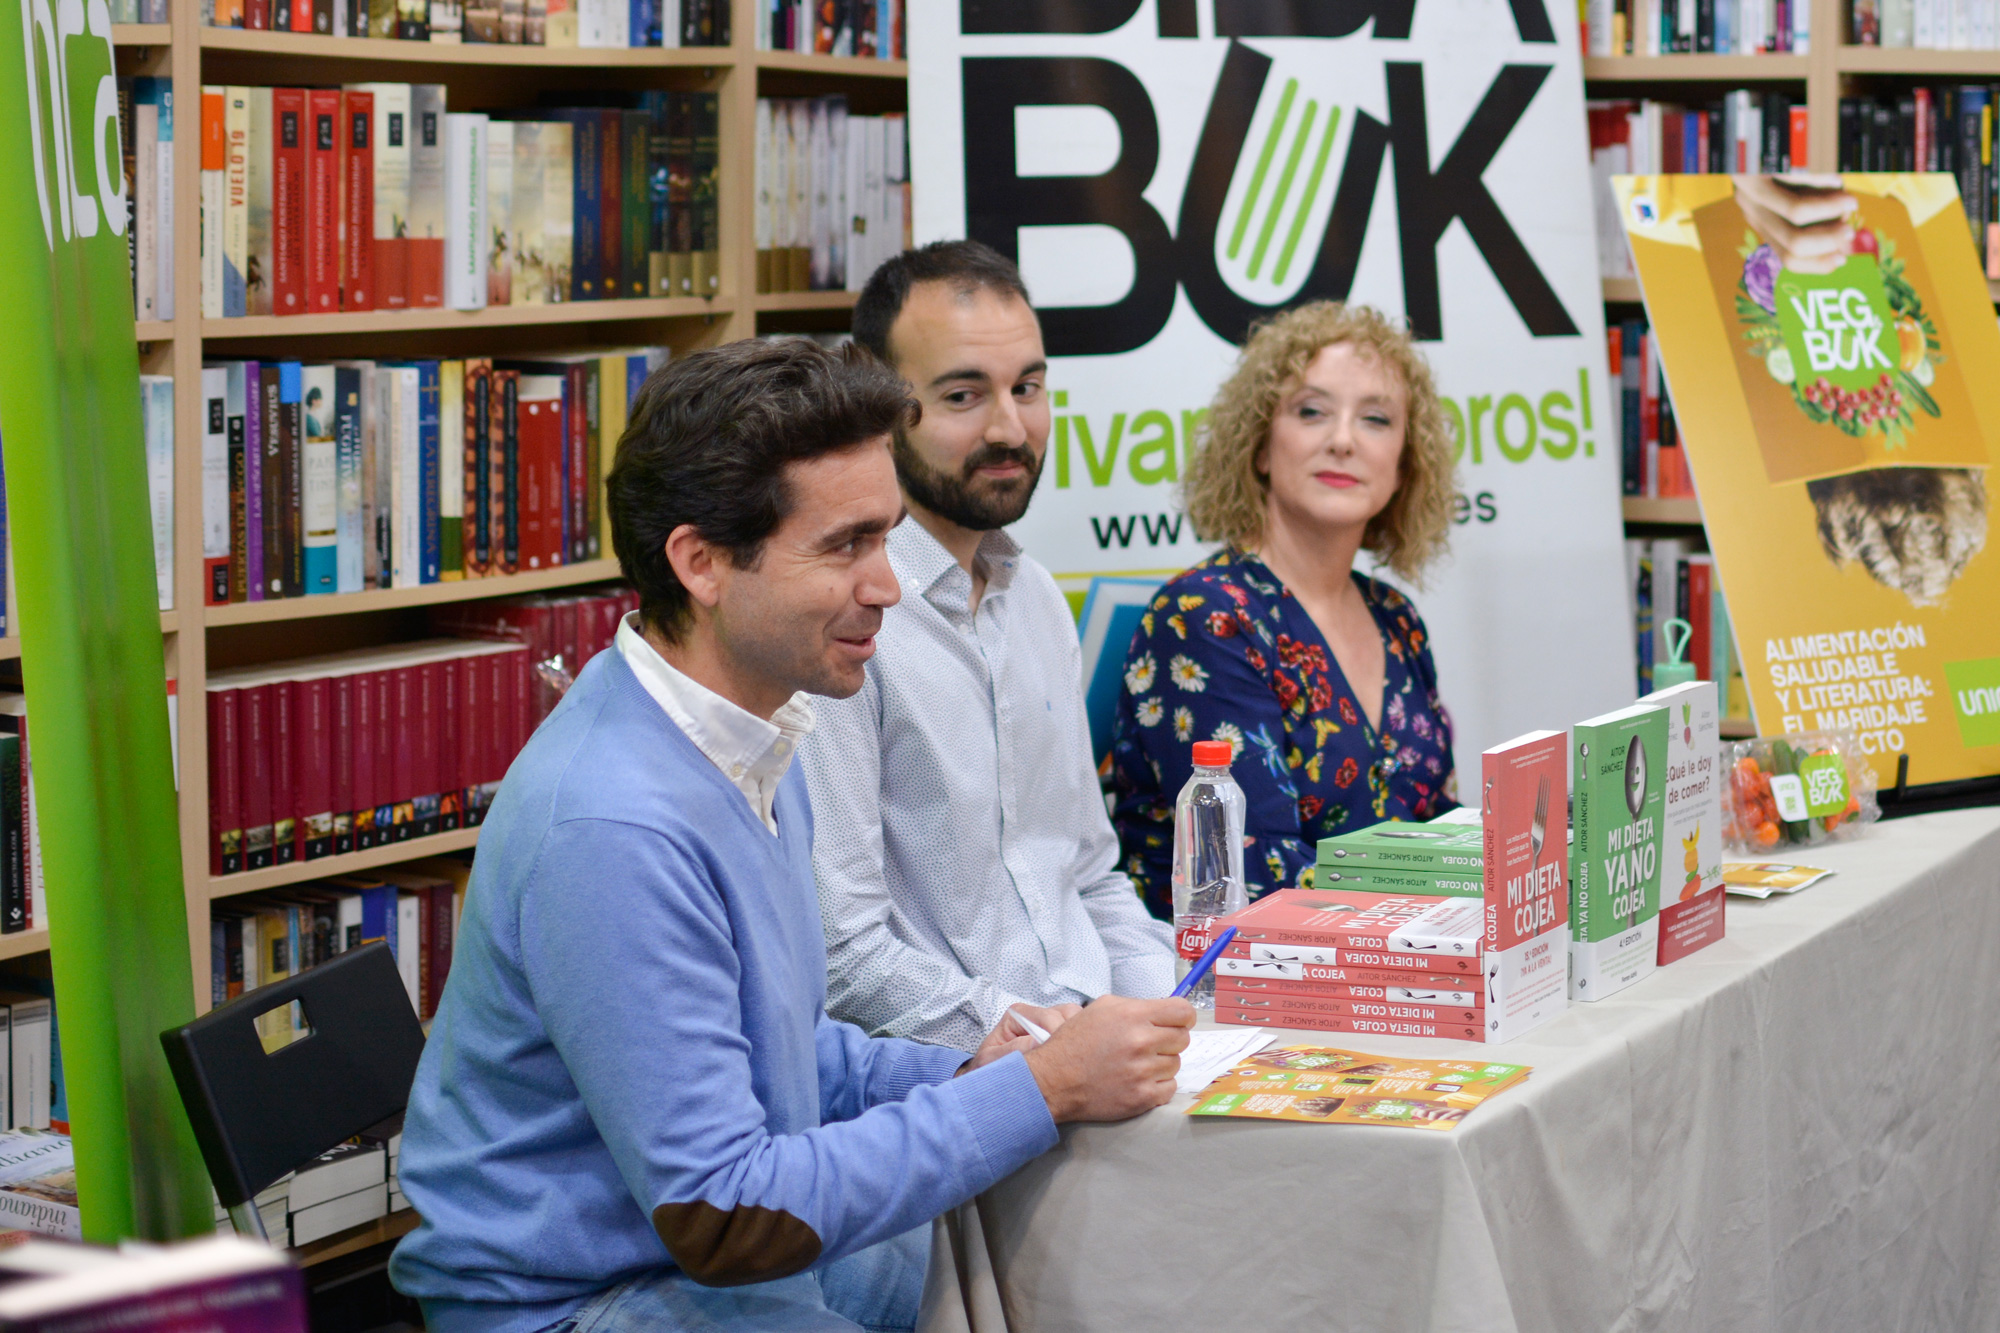 UNICA and Bibabuk launch ‘Veg & Buk’, a pairing of healthy food and literature